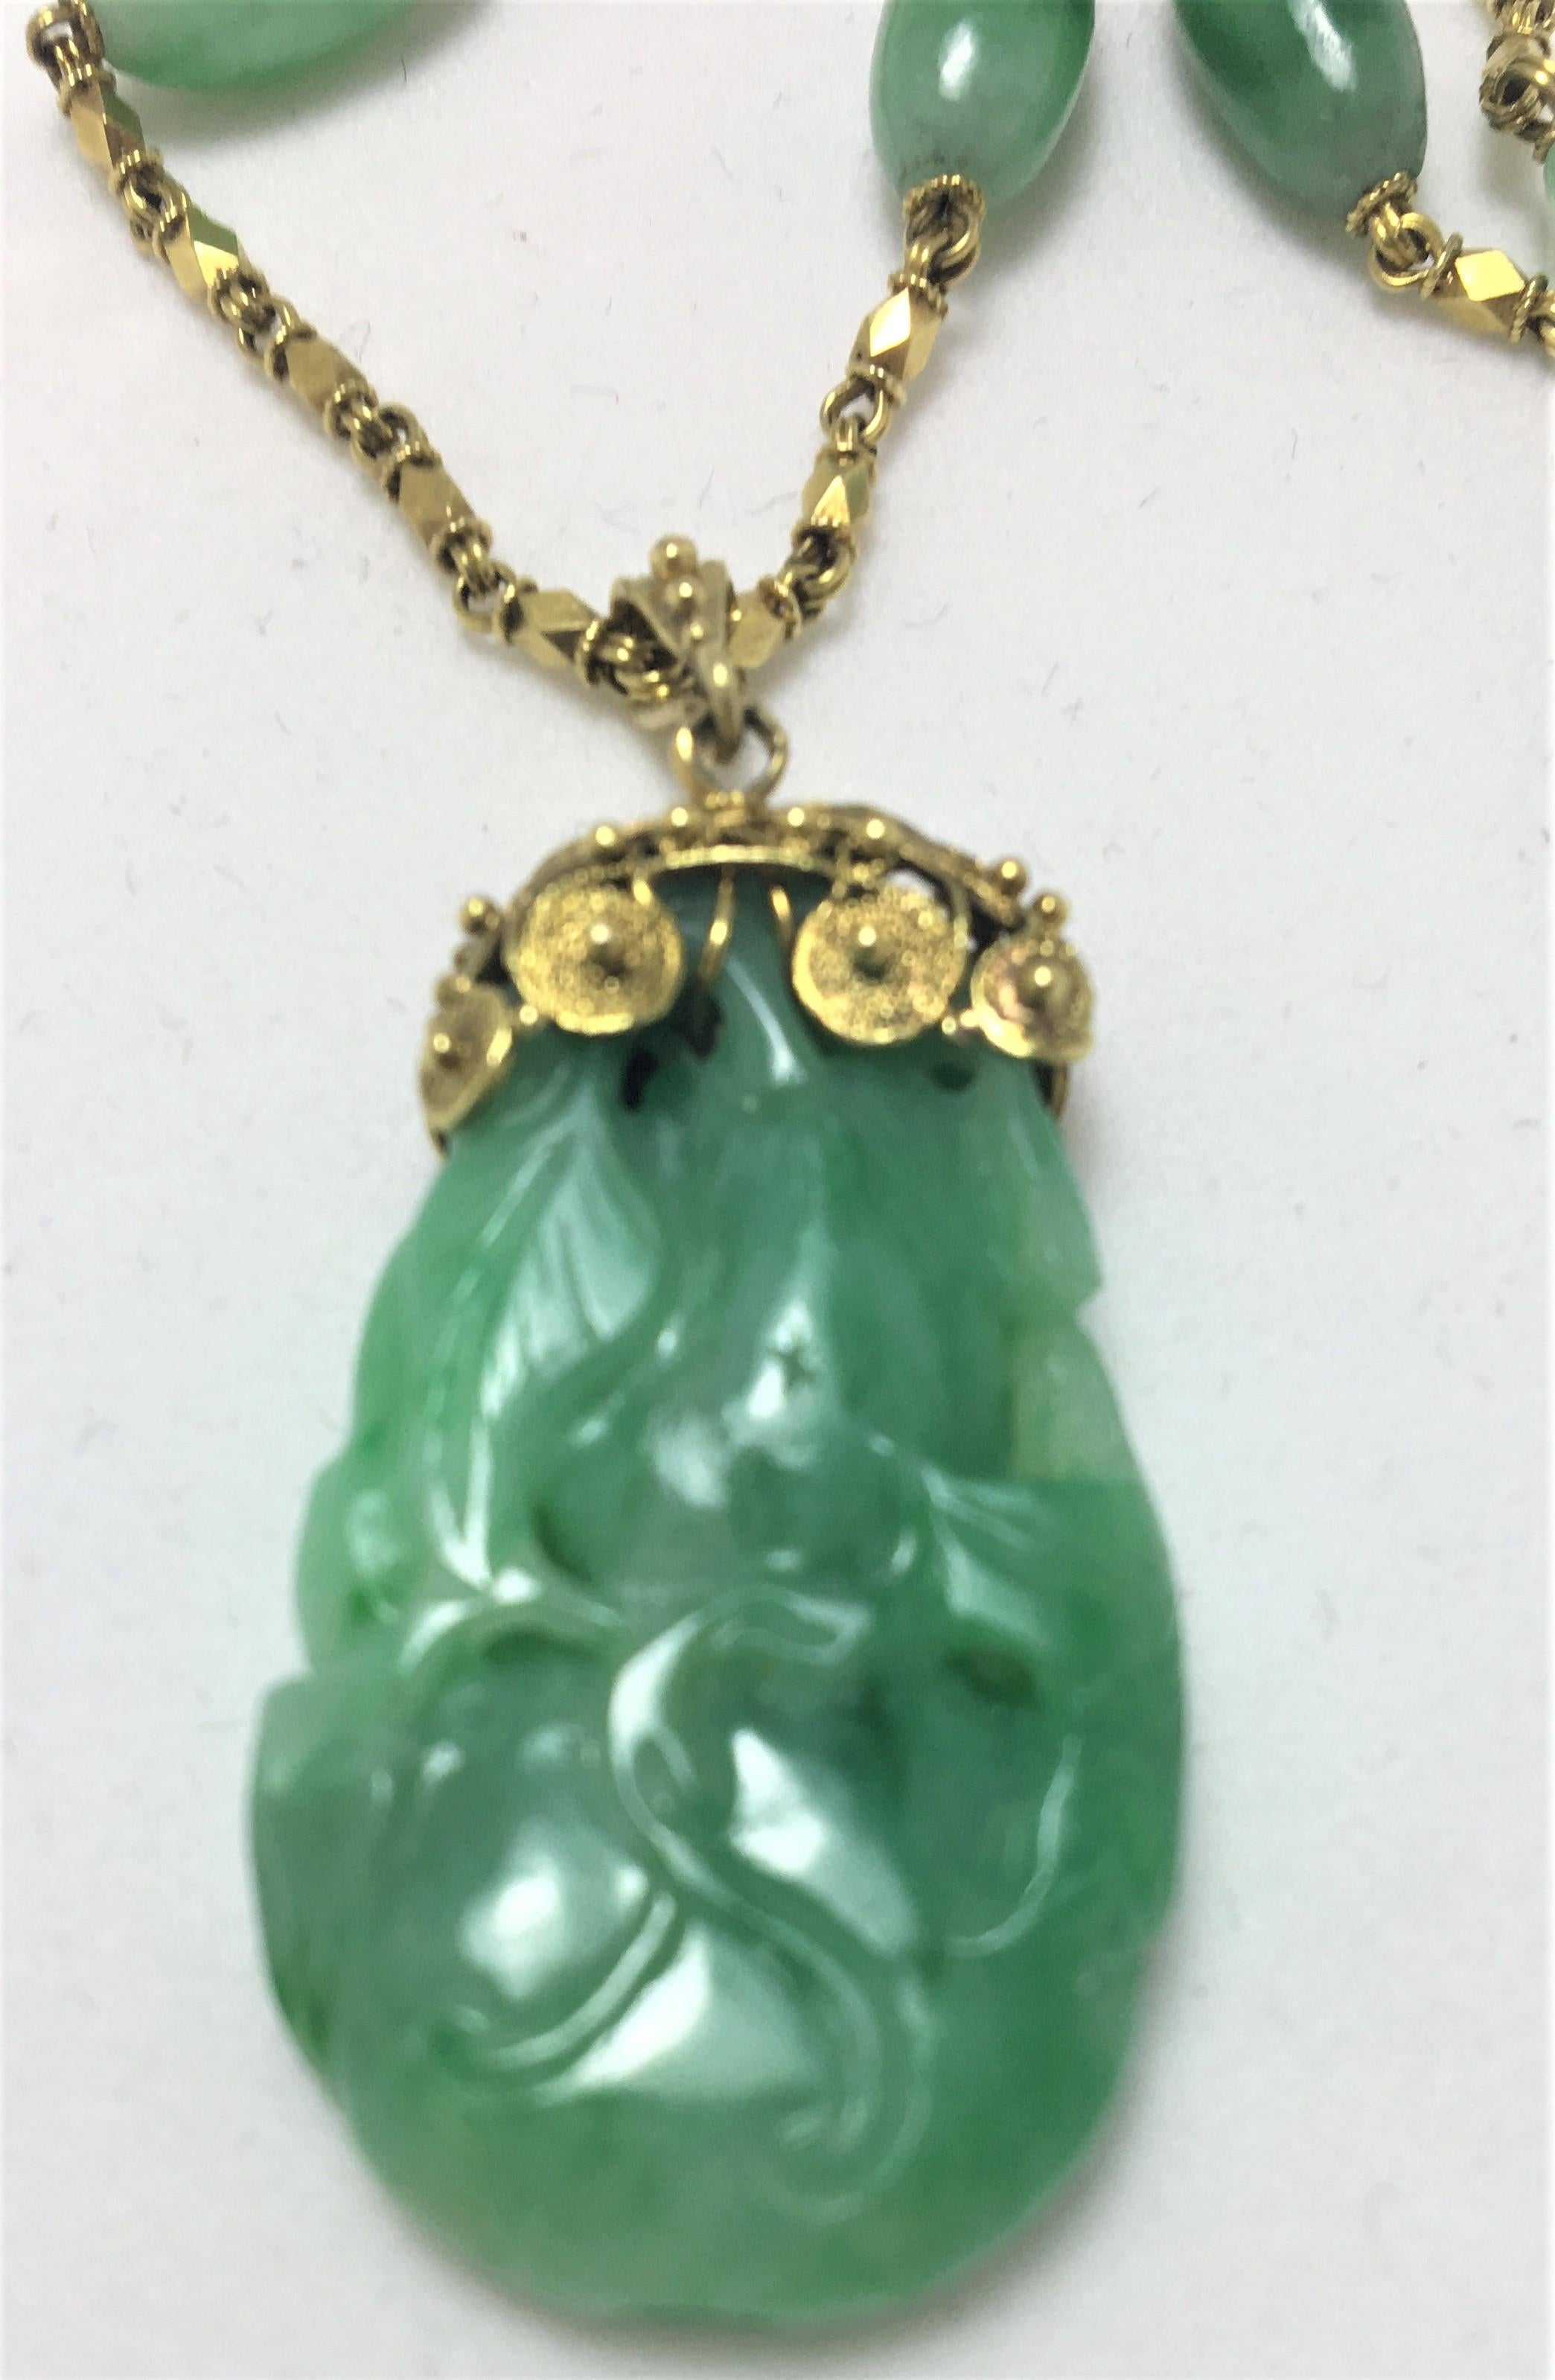 Large Pear Shape Jade Pendant, approximately 1.8mm Tapers to 1.5mm with carved design
GIA Certified as 